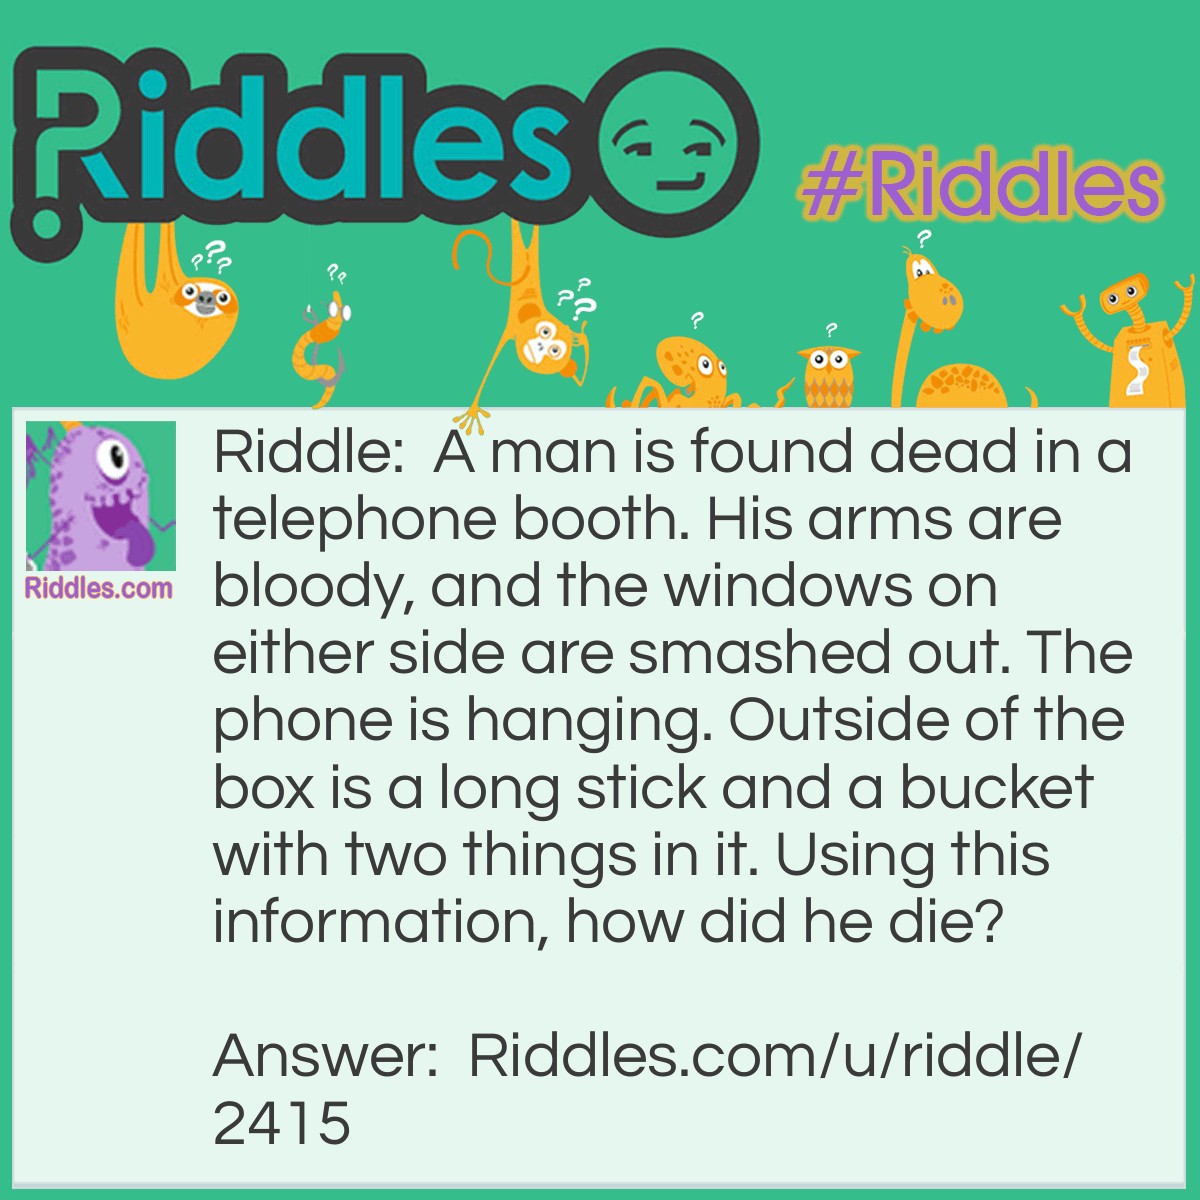 Riddle: A man is found dead in a telephone booth. His arms are bloody, and the windows on either side are smashed out. The phone is hanging. Outside of the box is a long stick and a bucket with two things in it. Using this information, how did he die? Answer: The man was talking on the phone after being on a fishing trip. He was describing the size of the fish he caught (the stick was a fishing rod and the items were water and a fish), but forgot that the booth was too small to do so as he put out his arms to gesture how big it was. He bled to death from the cuts.